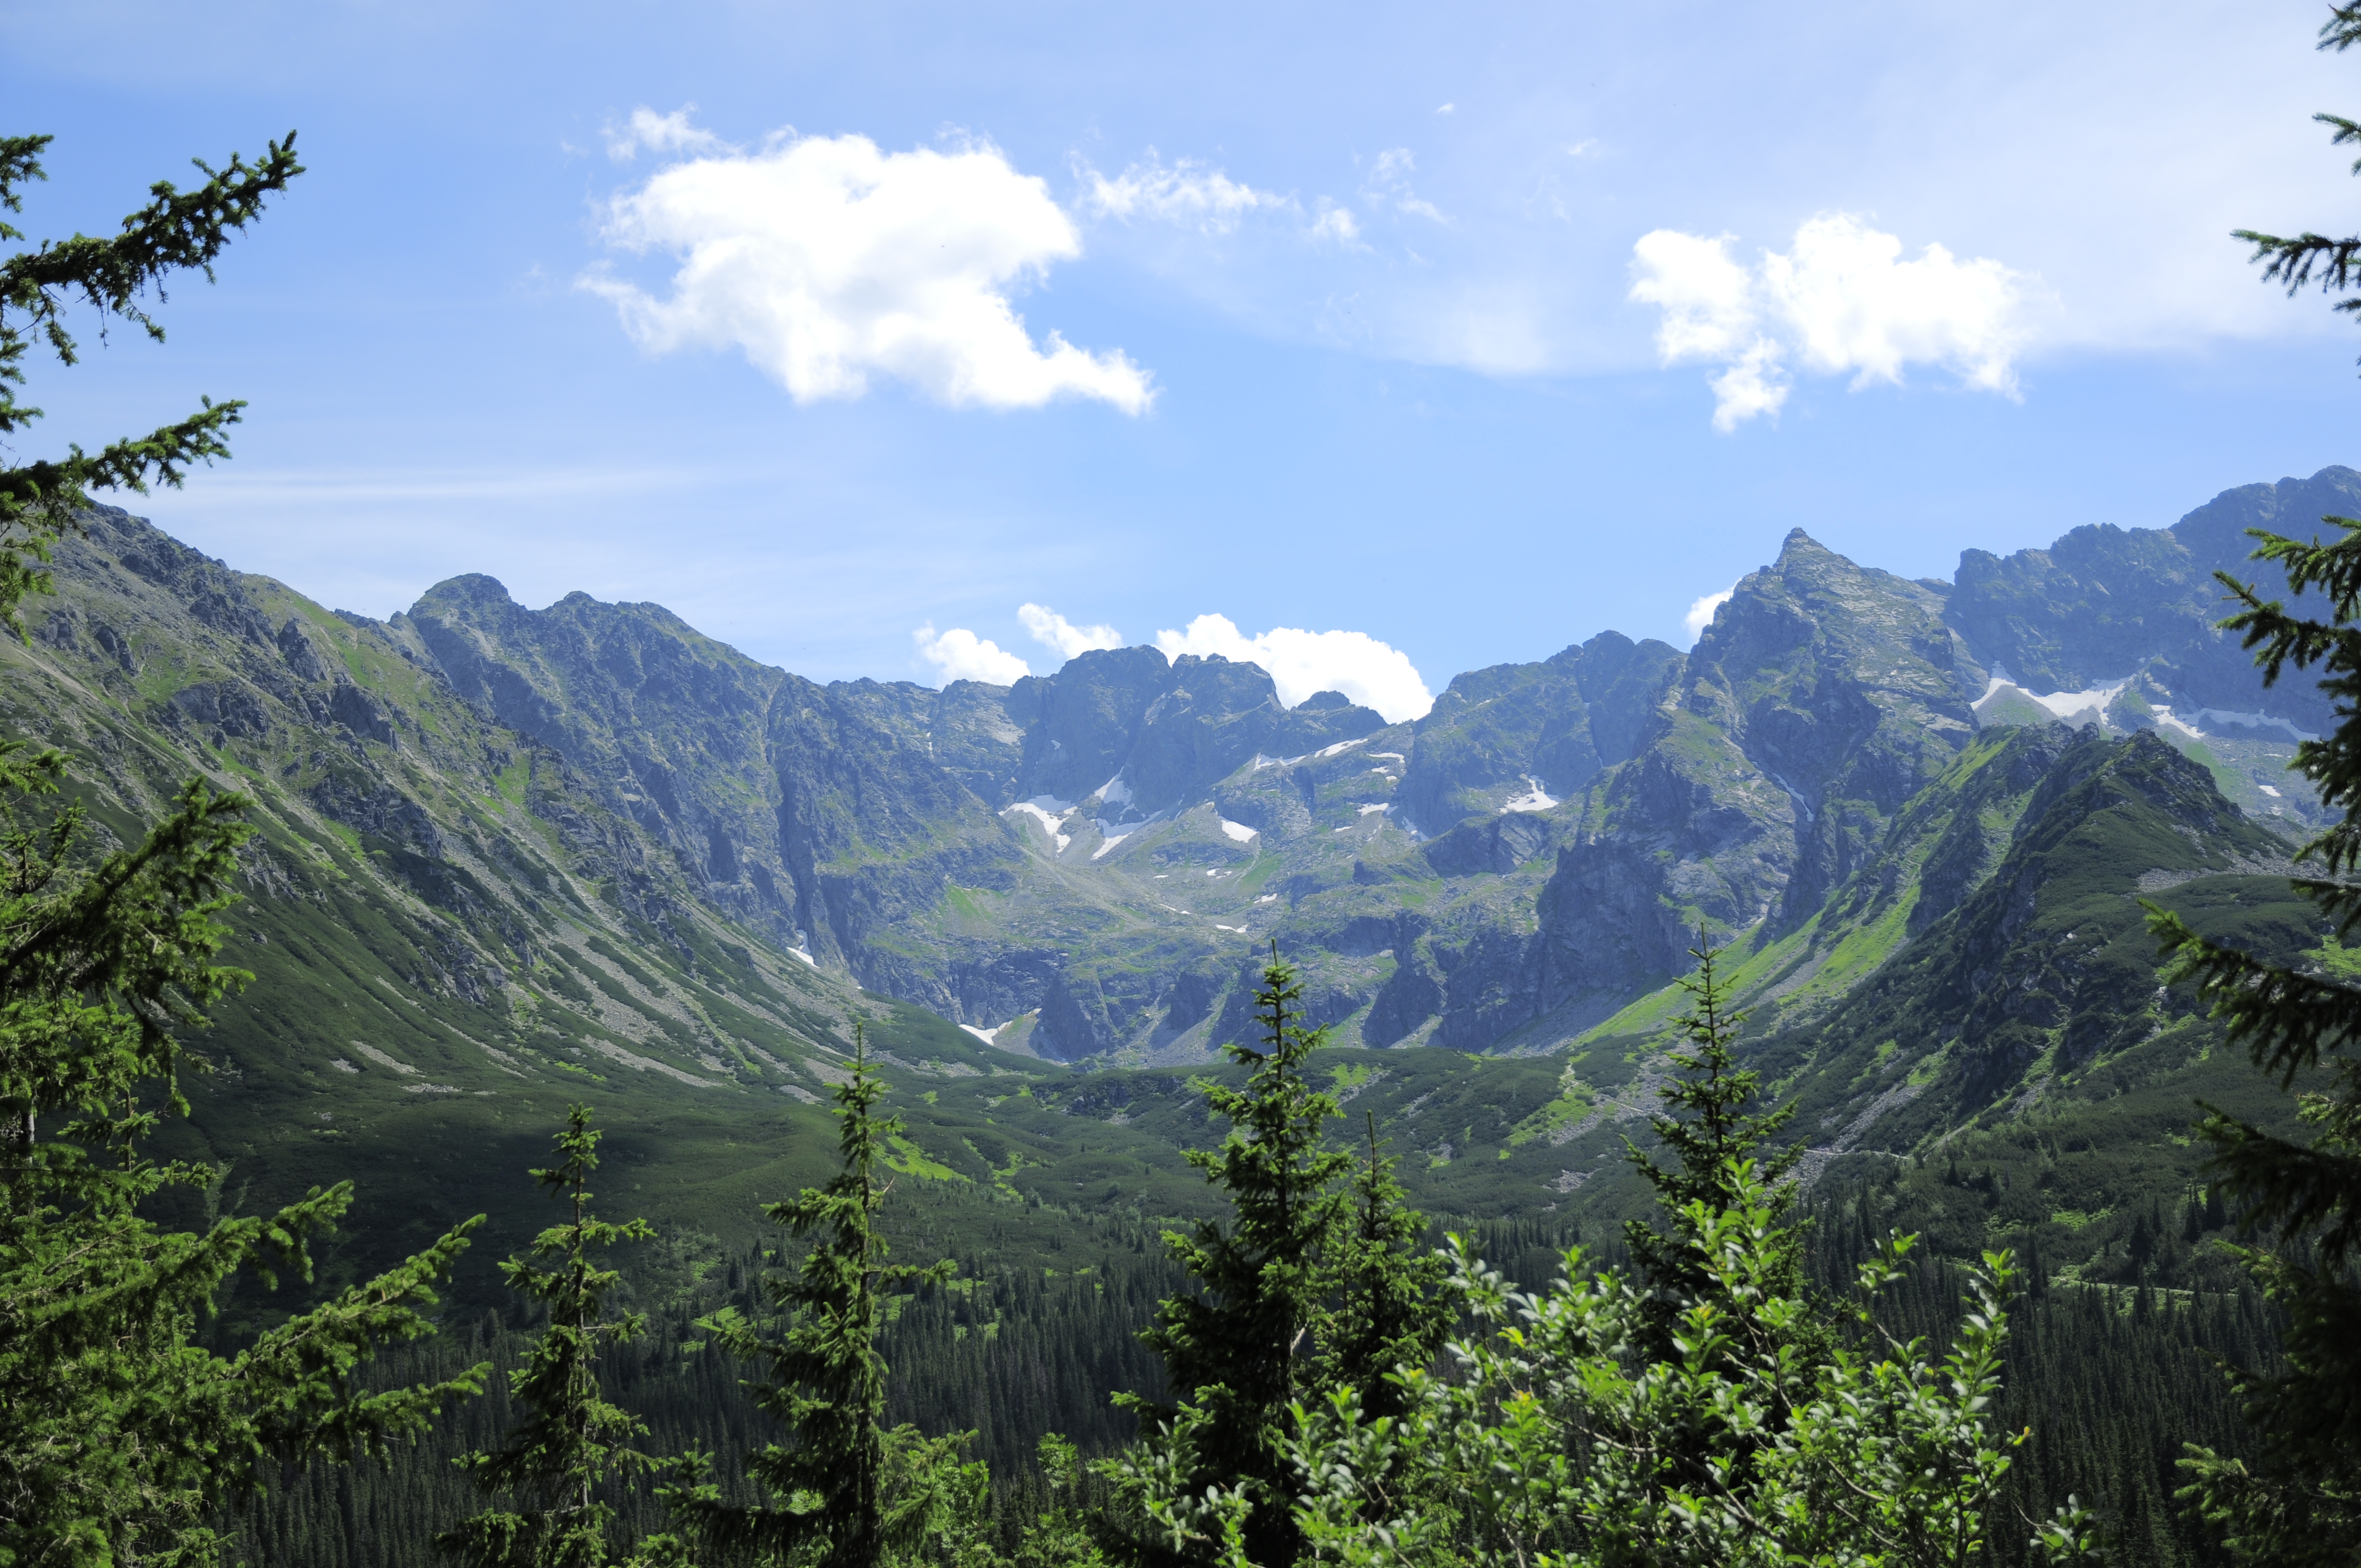 General 4288x2848 nature landscape Poland Tatra Mountains mountain chain mountain pass valley sky clouds trees mountains